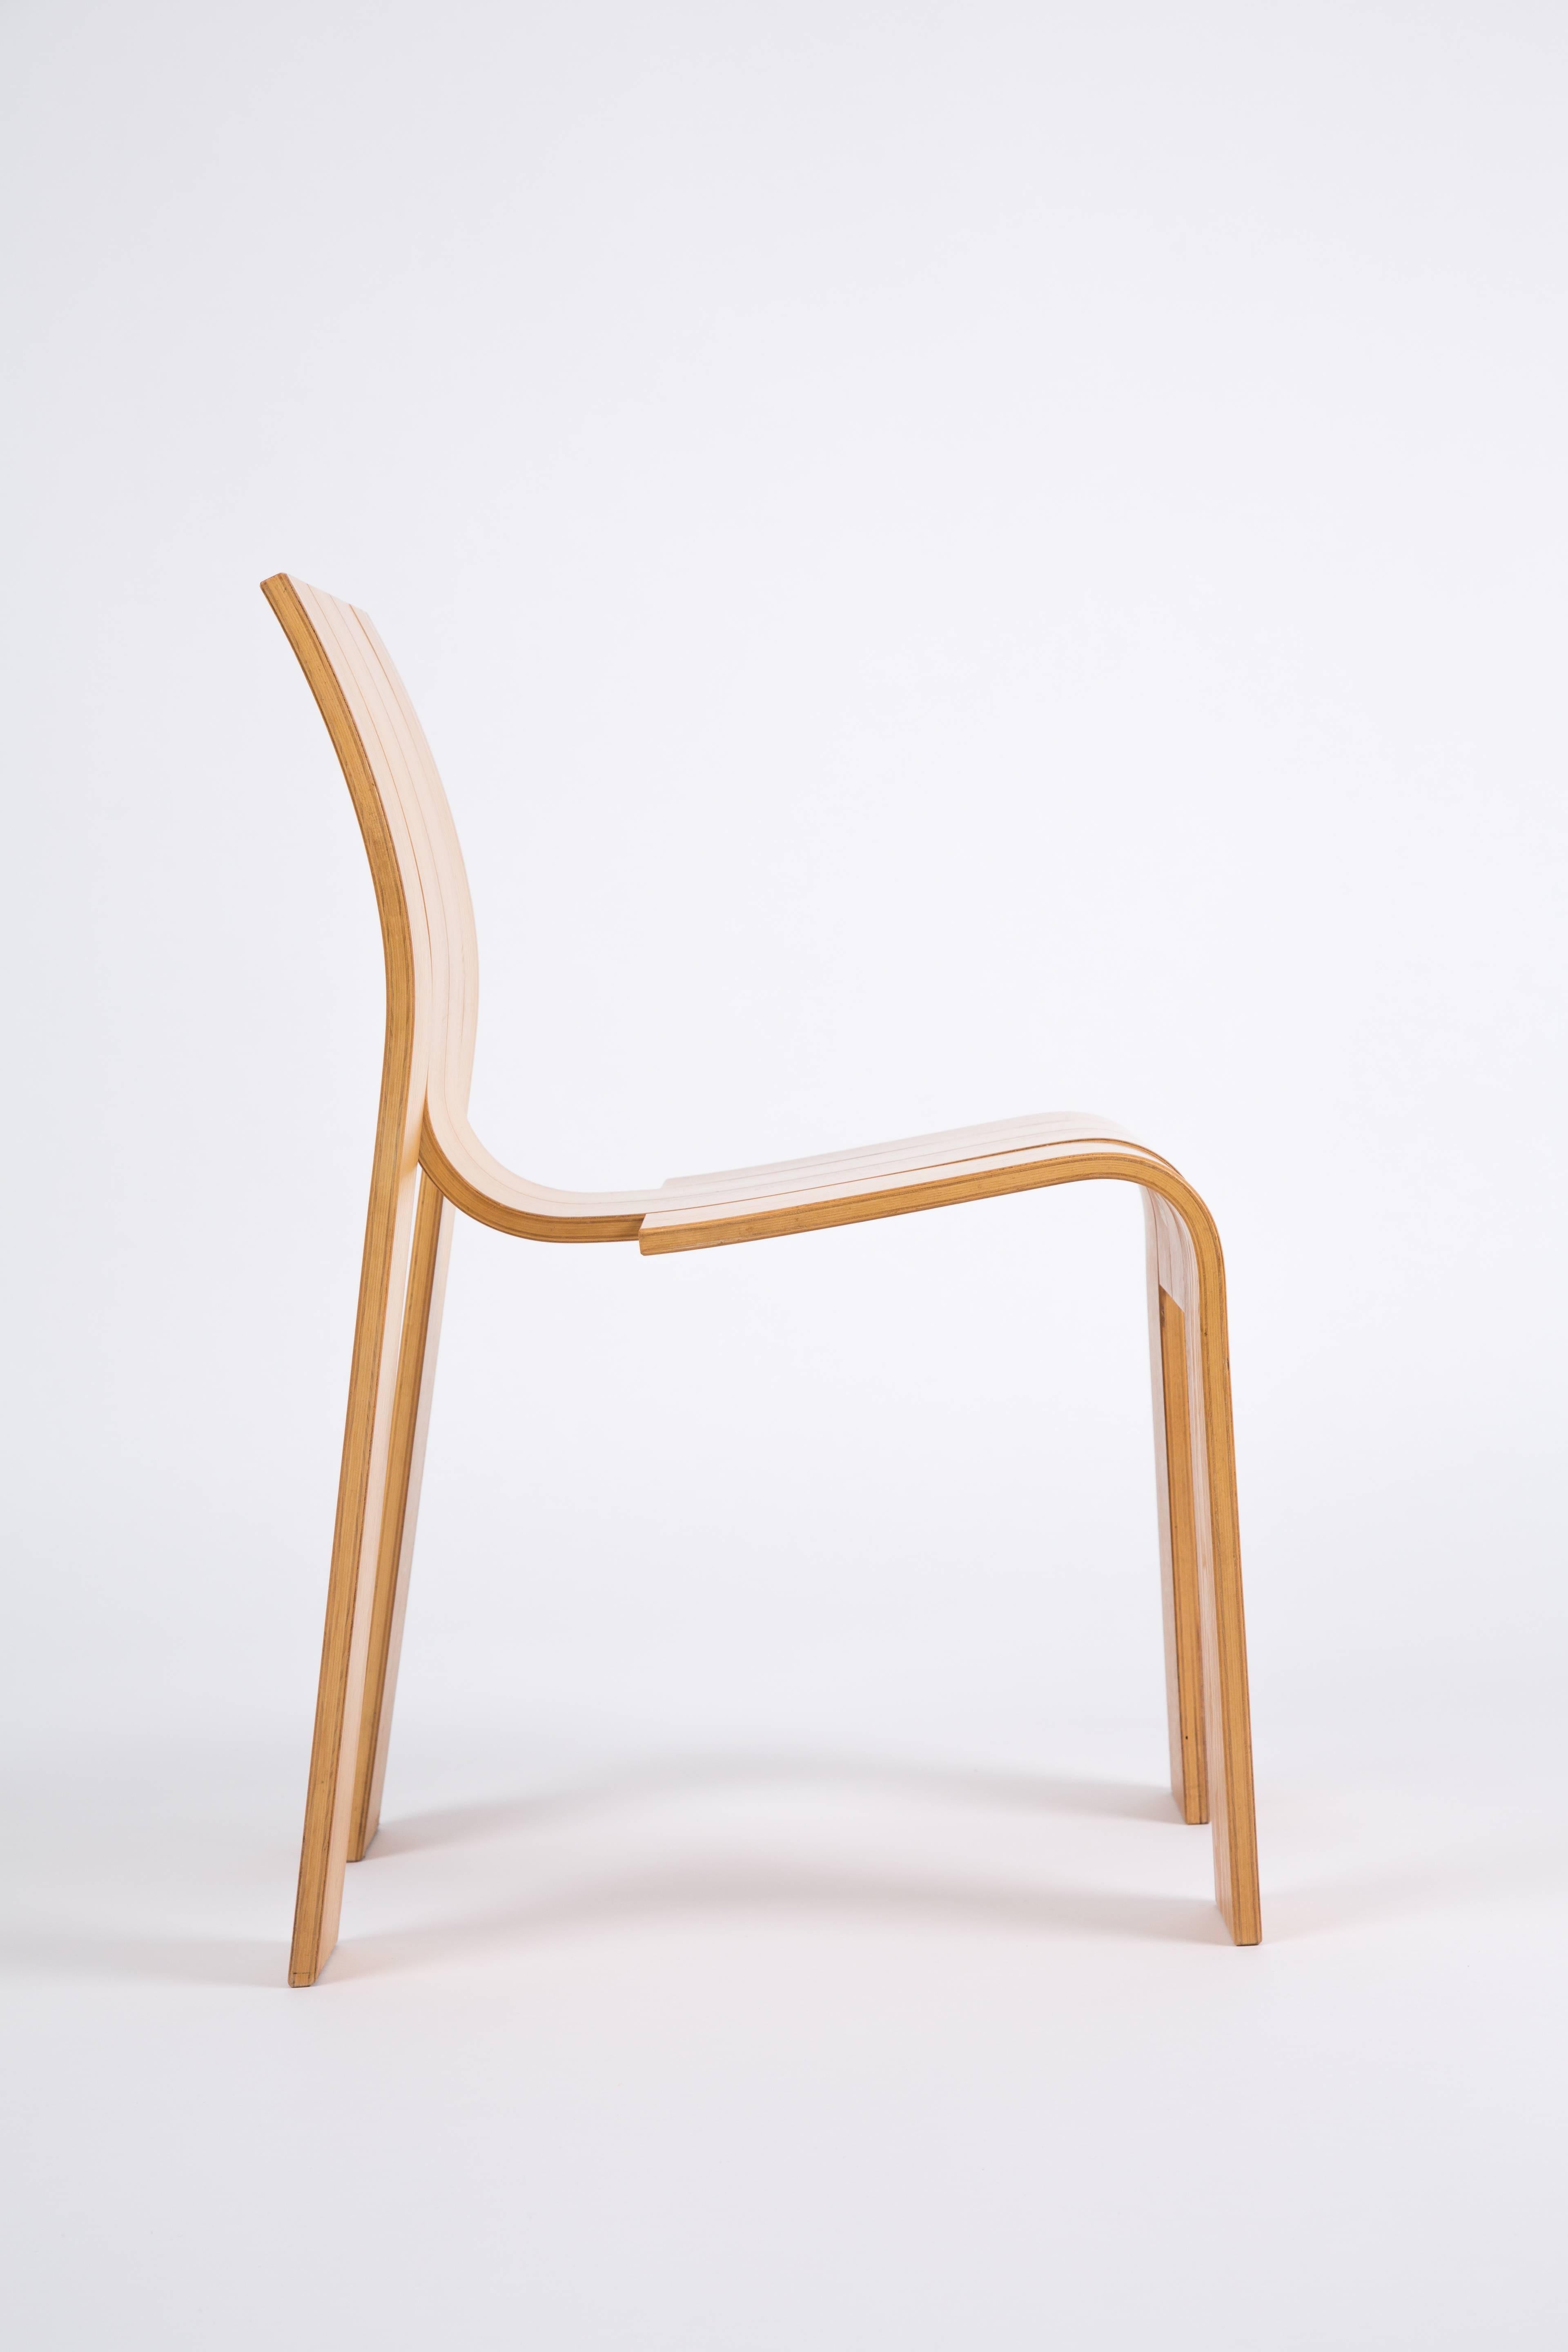 GIJS BAKKER STRIP CHAIRS with the strip table 2